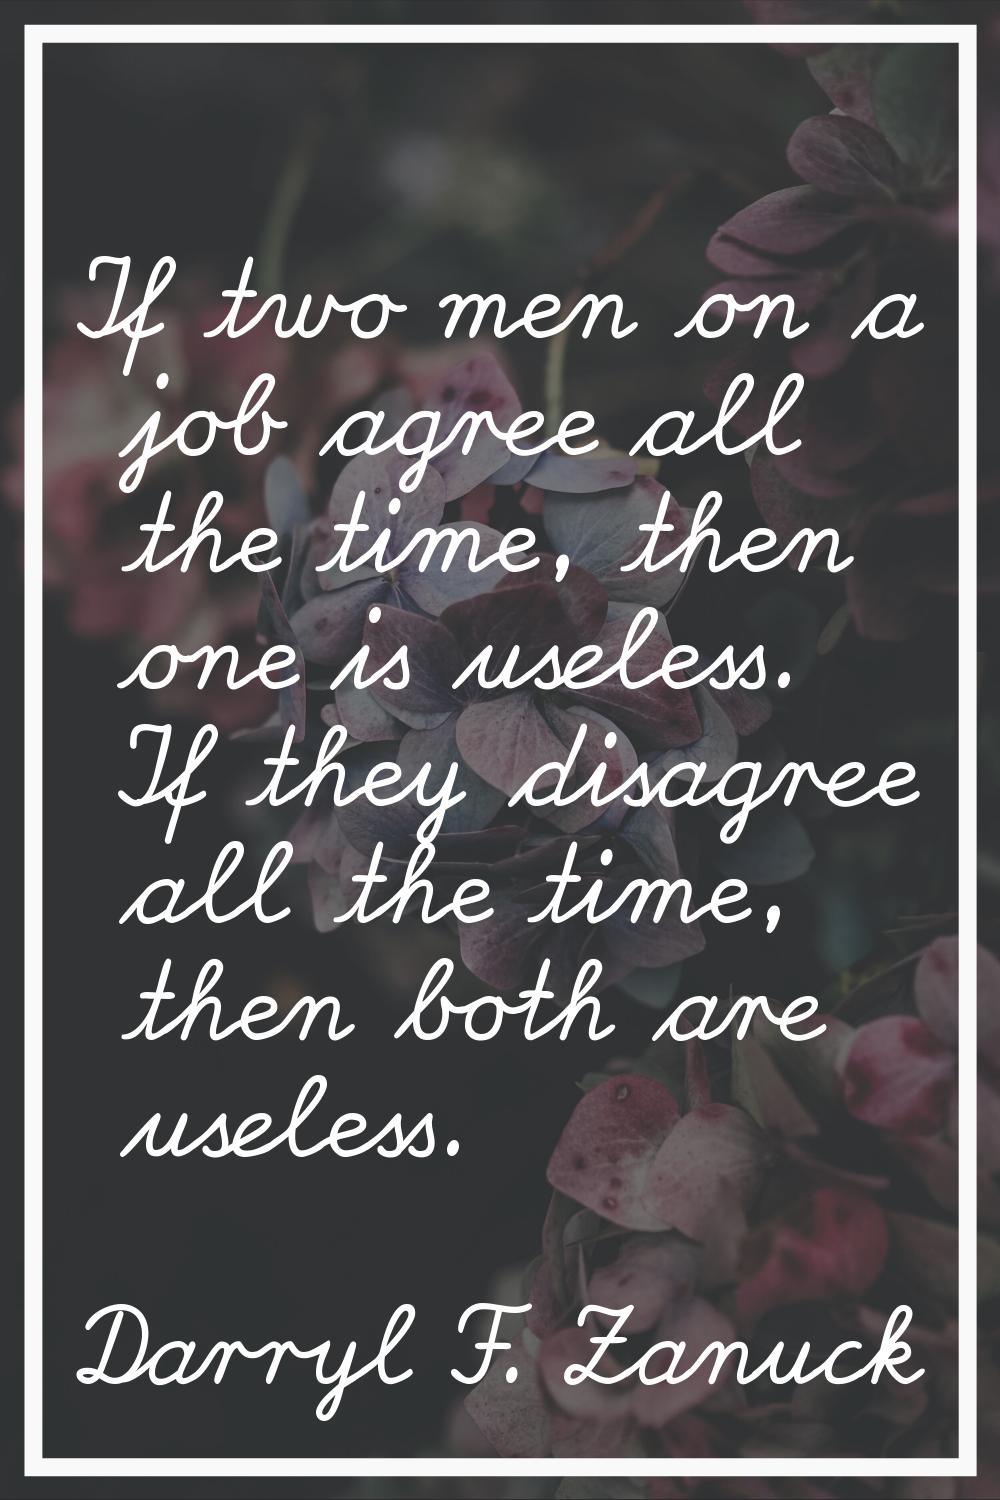 If two men on a job agree all the time, then one is useless. If they disagree all the time, then bo